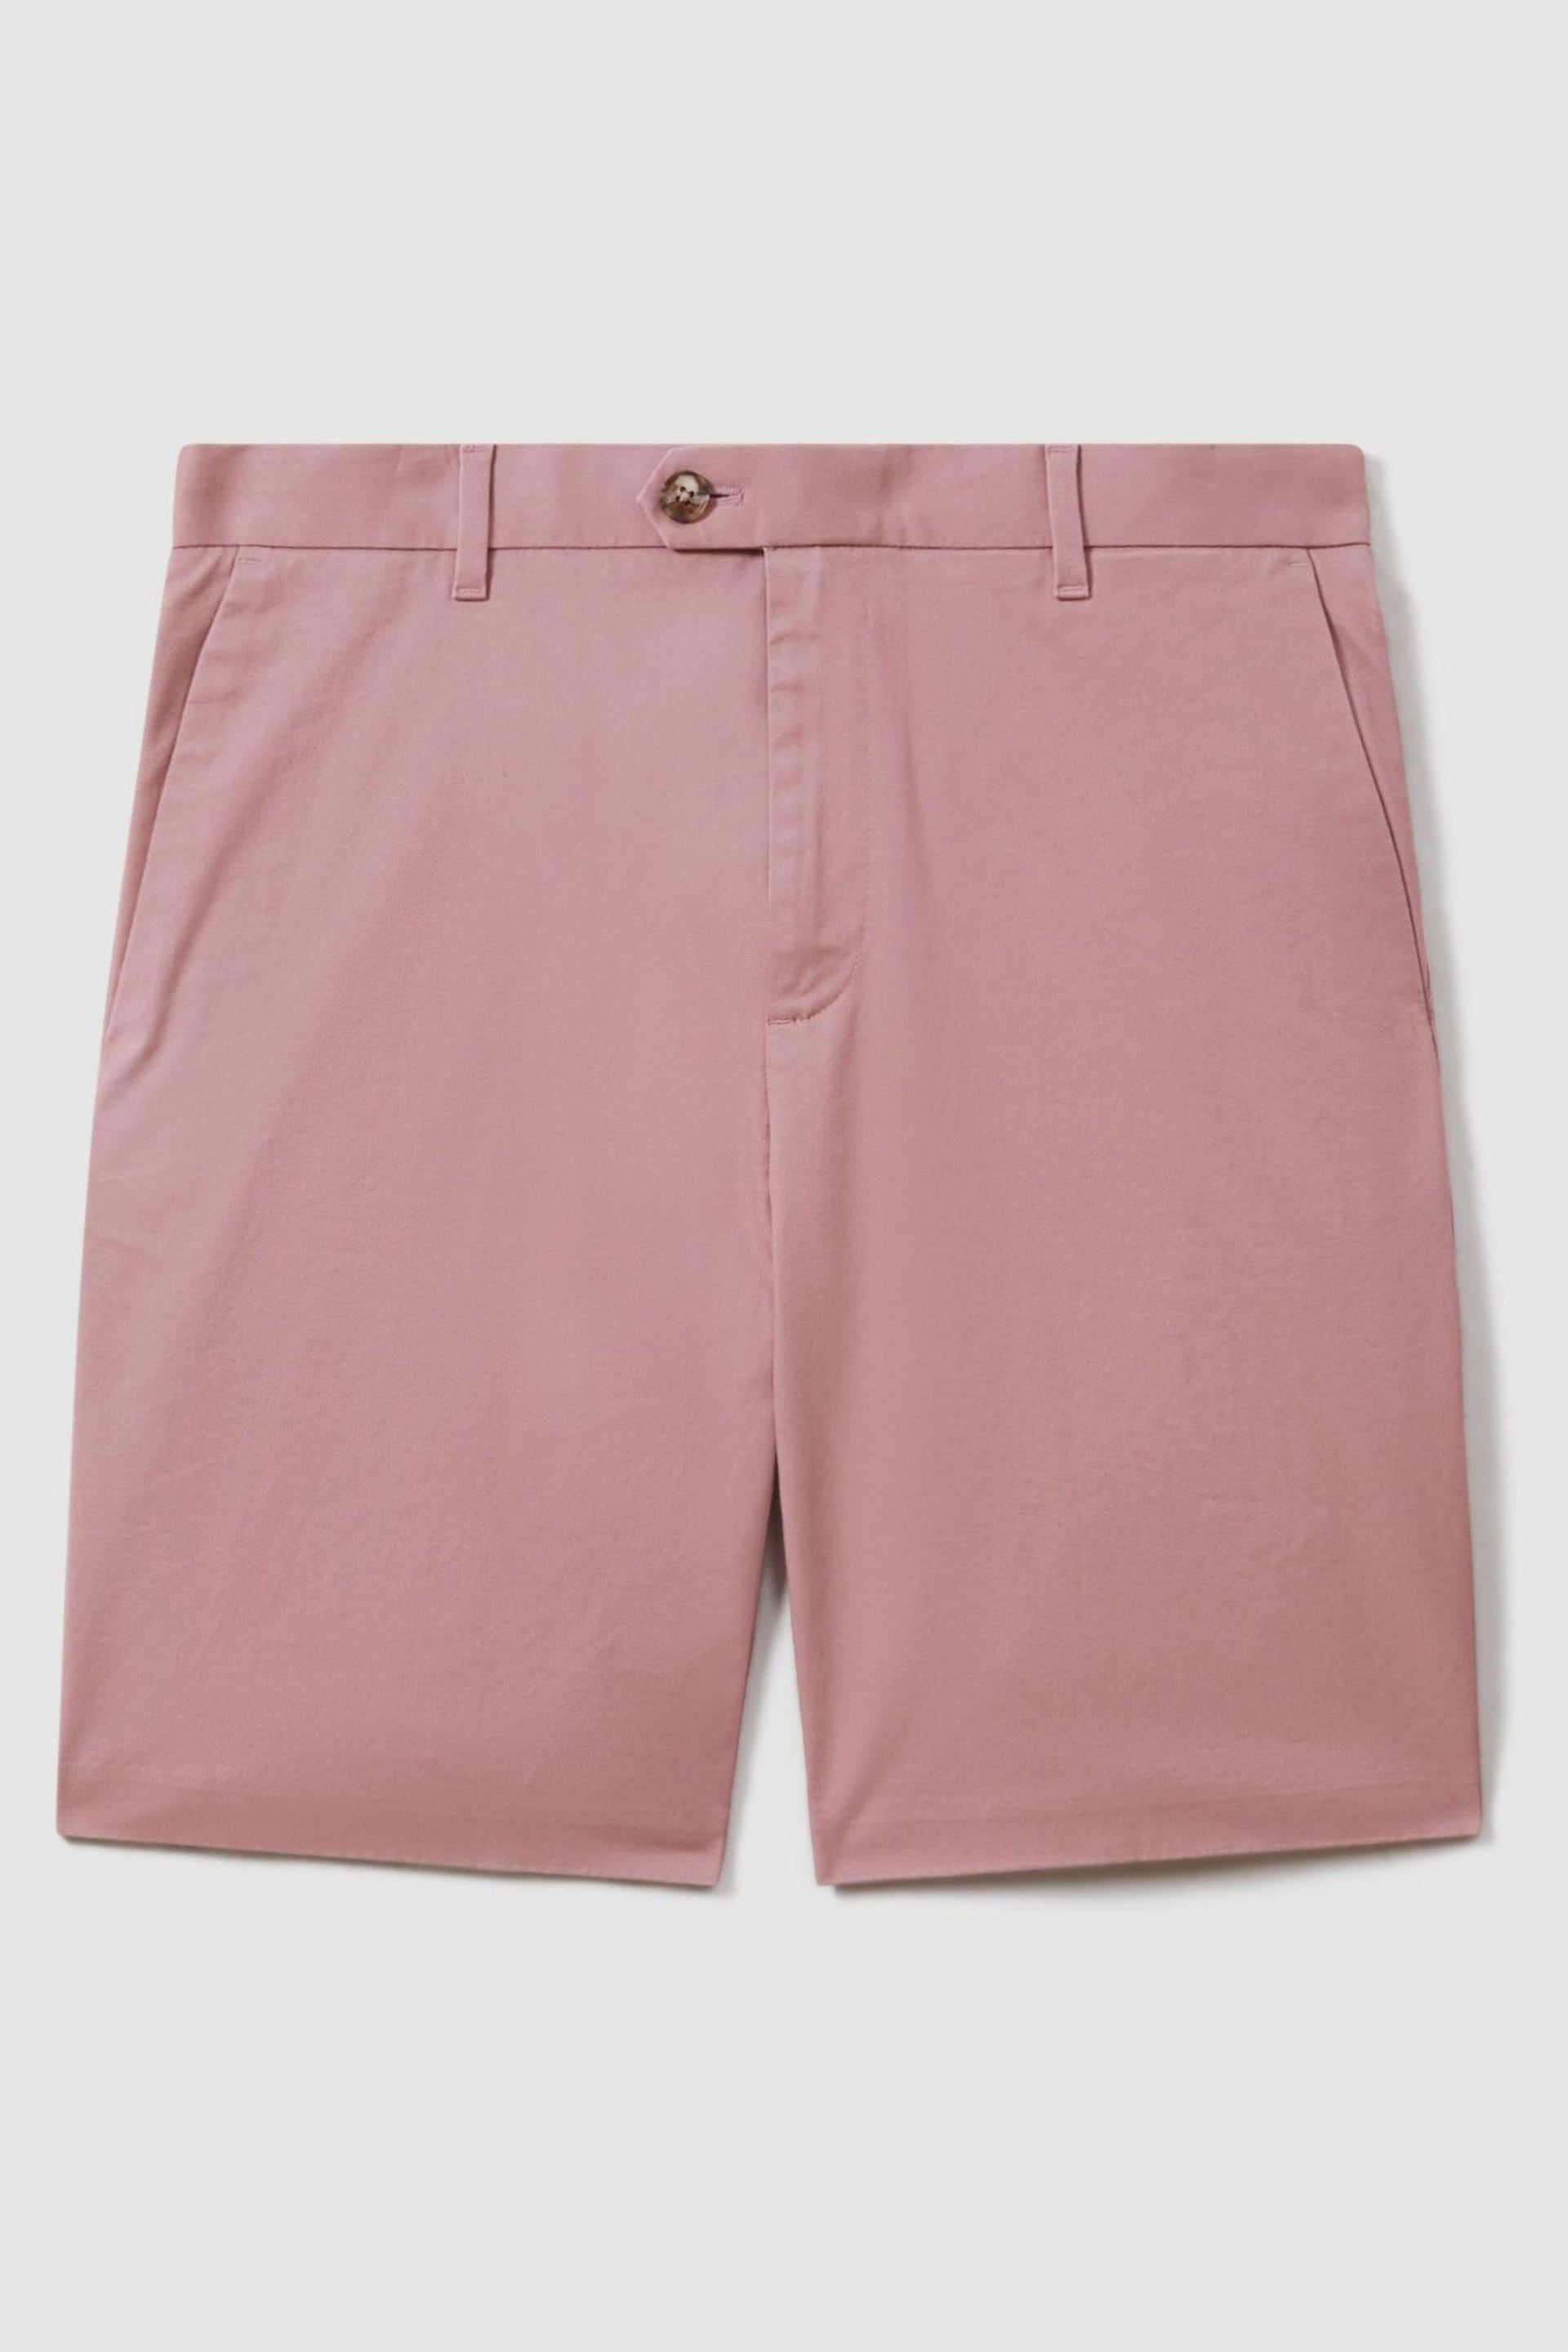 Reiss Dusty Pink Wicket Modern Fit Cotton Blend Chino Shorts - Image 2 of 7